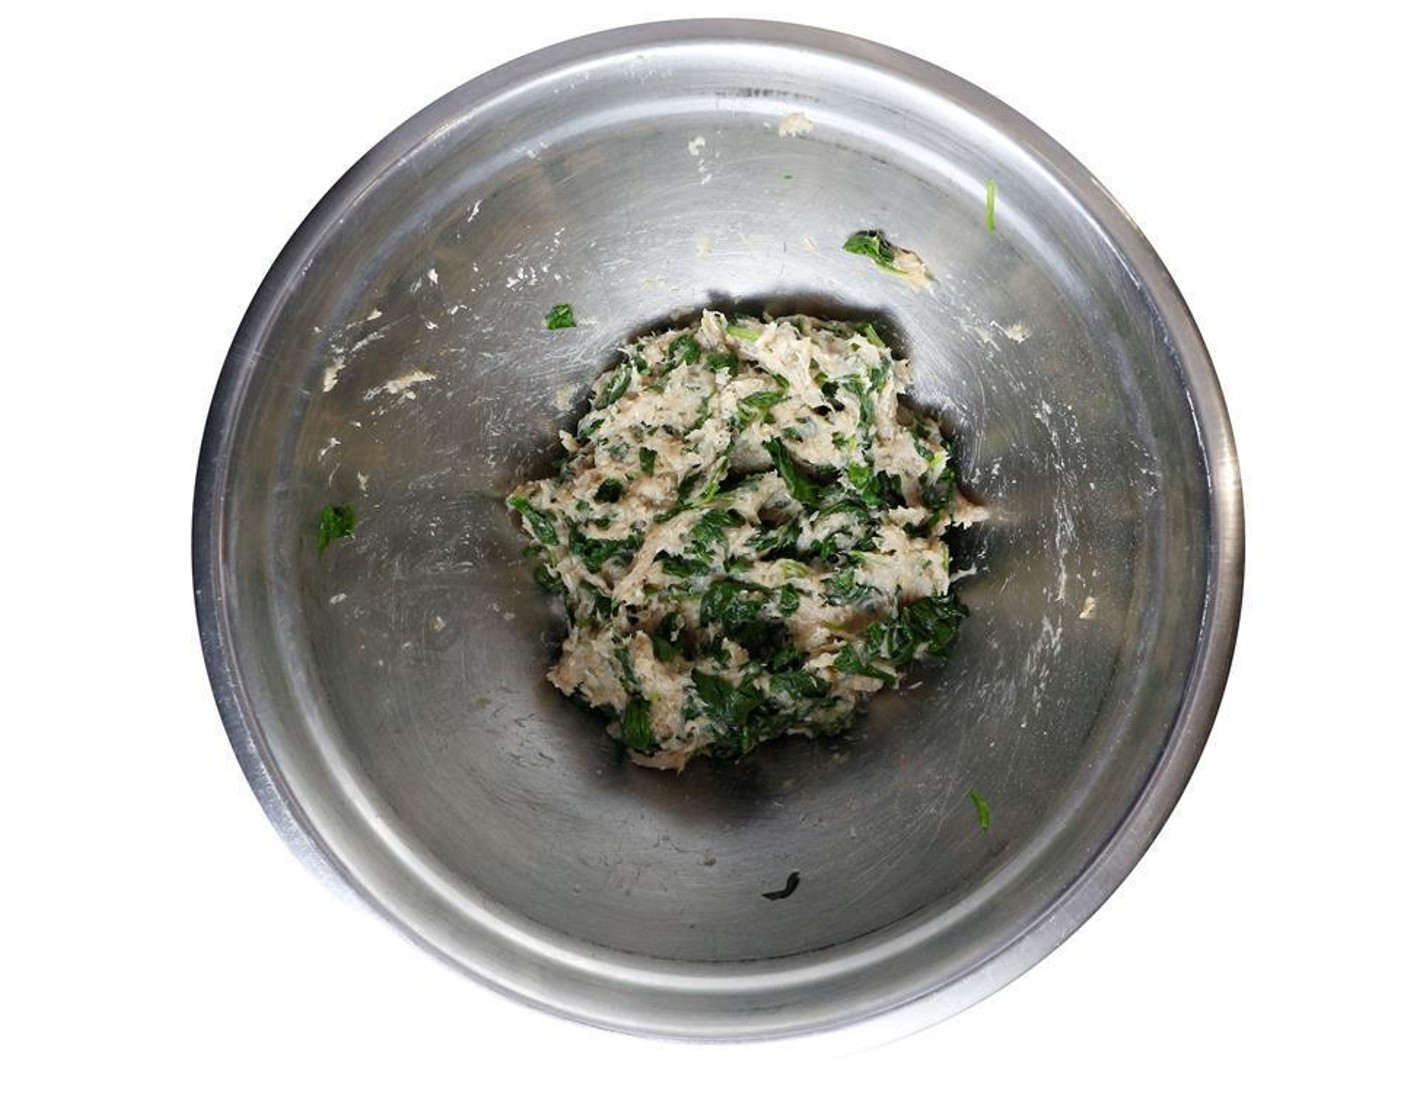 step 5 In a bowl, combine Ground Turkey (12 oz) with sliced scallions, Feta Cheese (1/3 cup) and chopped spinach. Season with a large pinch of salt and a pinch of pepper. Mix with your hands.